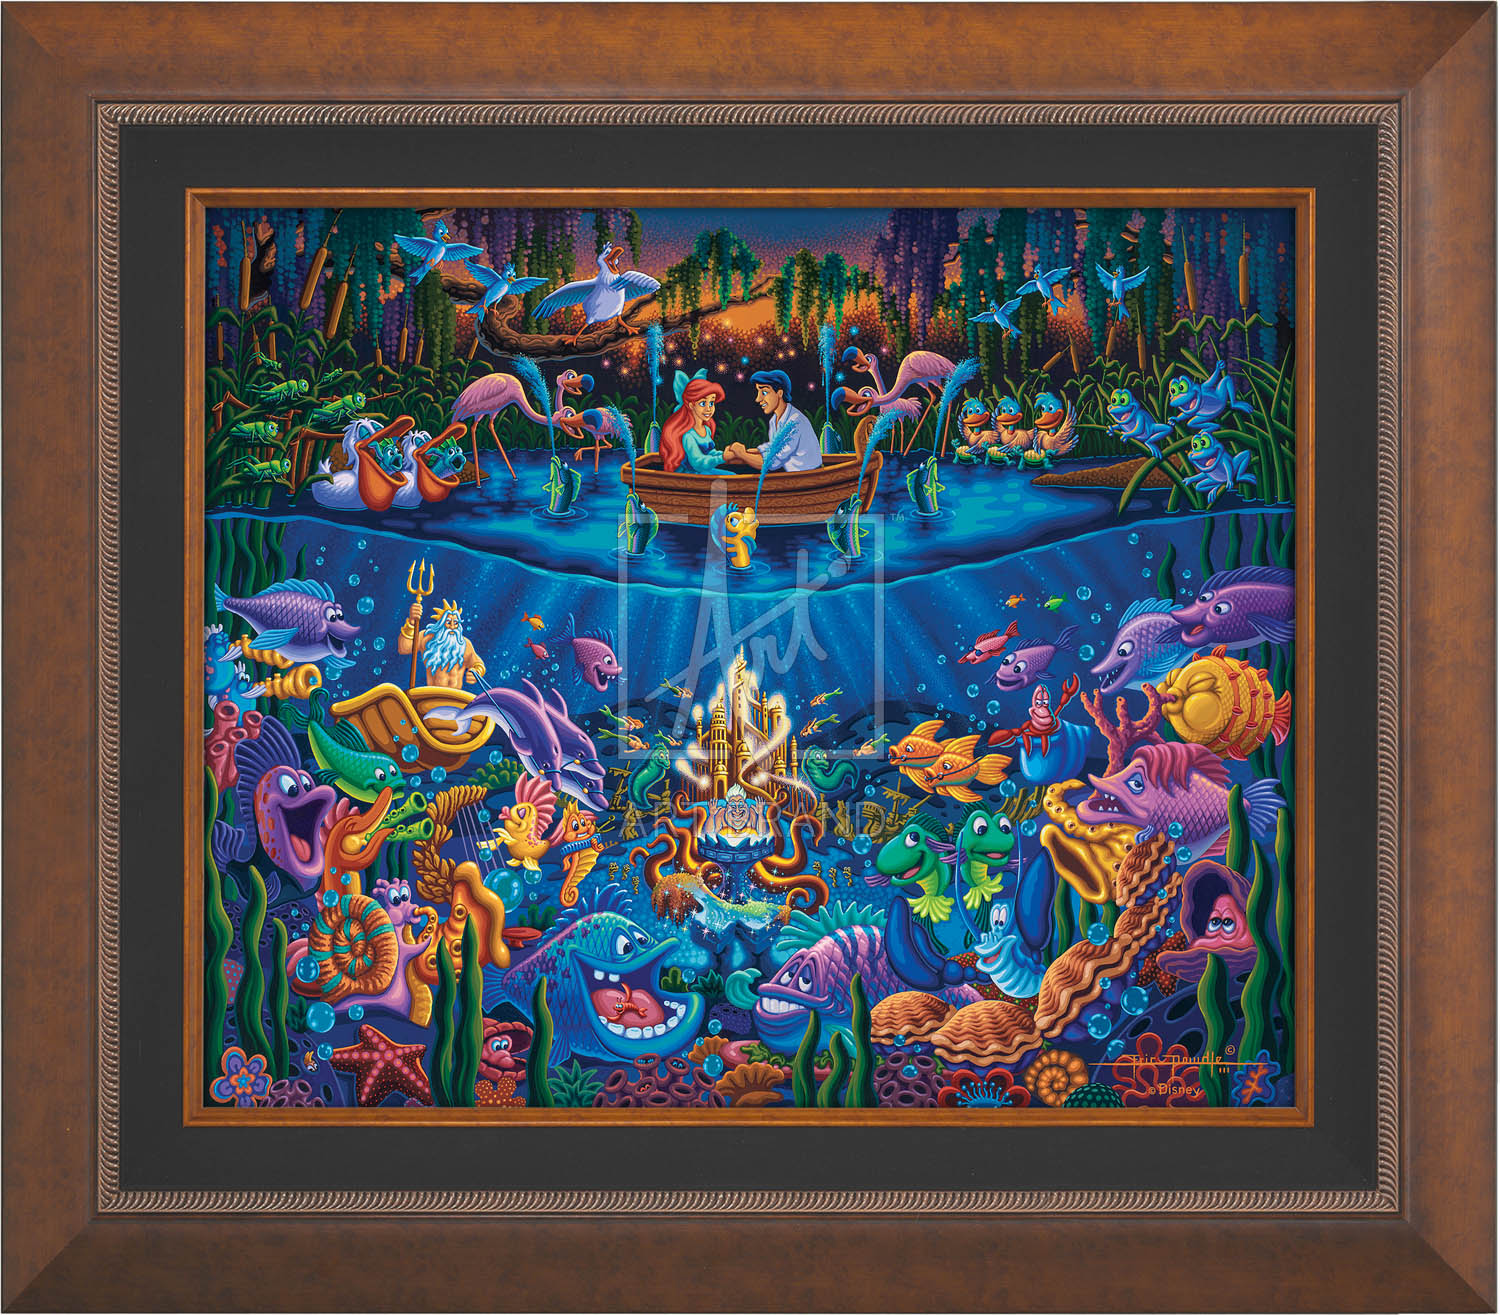 Ariel’s closest friend and confidante, Flounder, adds to the ambiance as he and six friends create a makeshift fountain around Eric’s boat - Aurora Copper Frame.